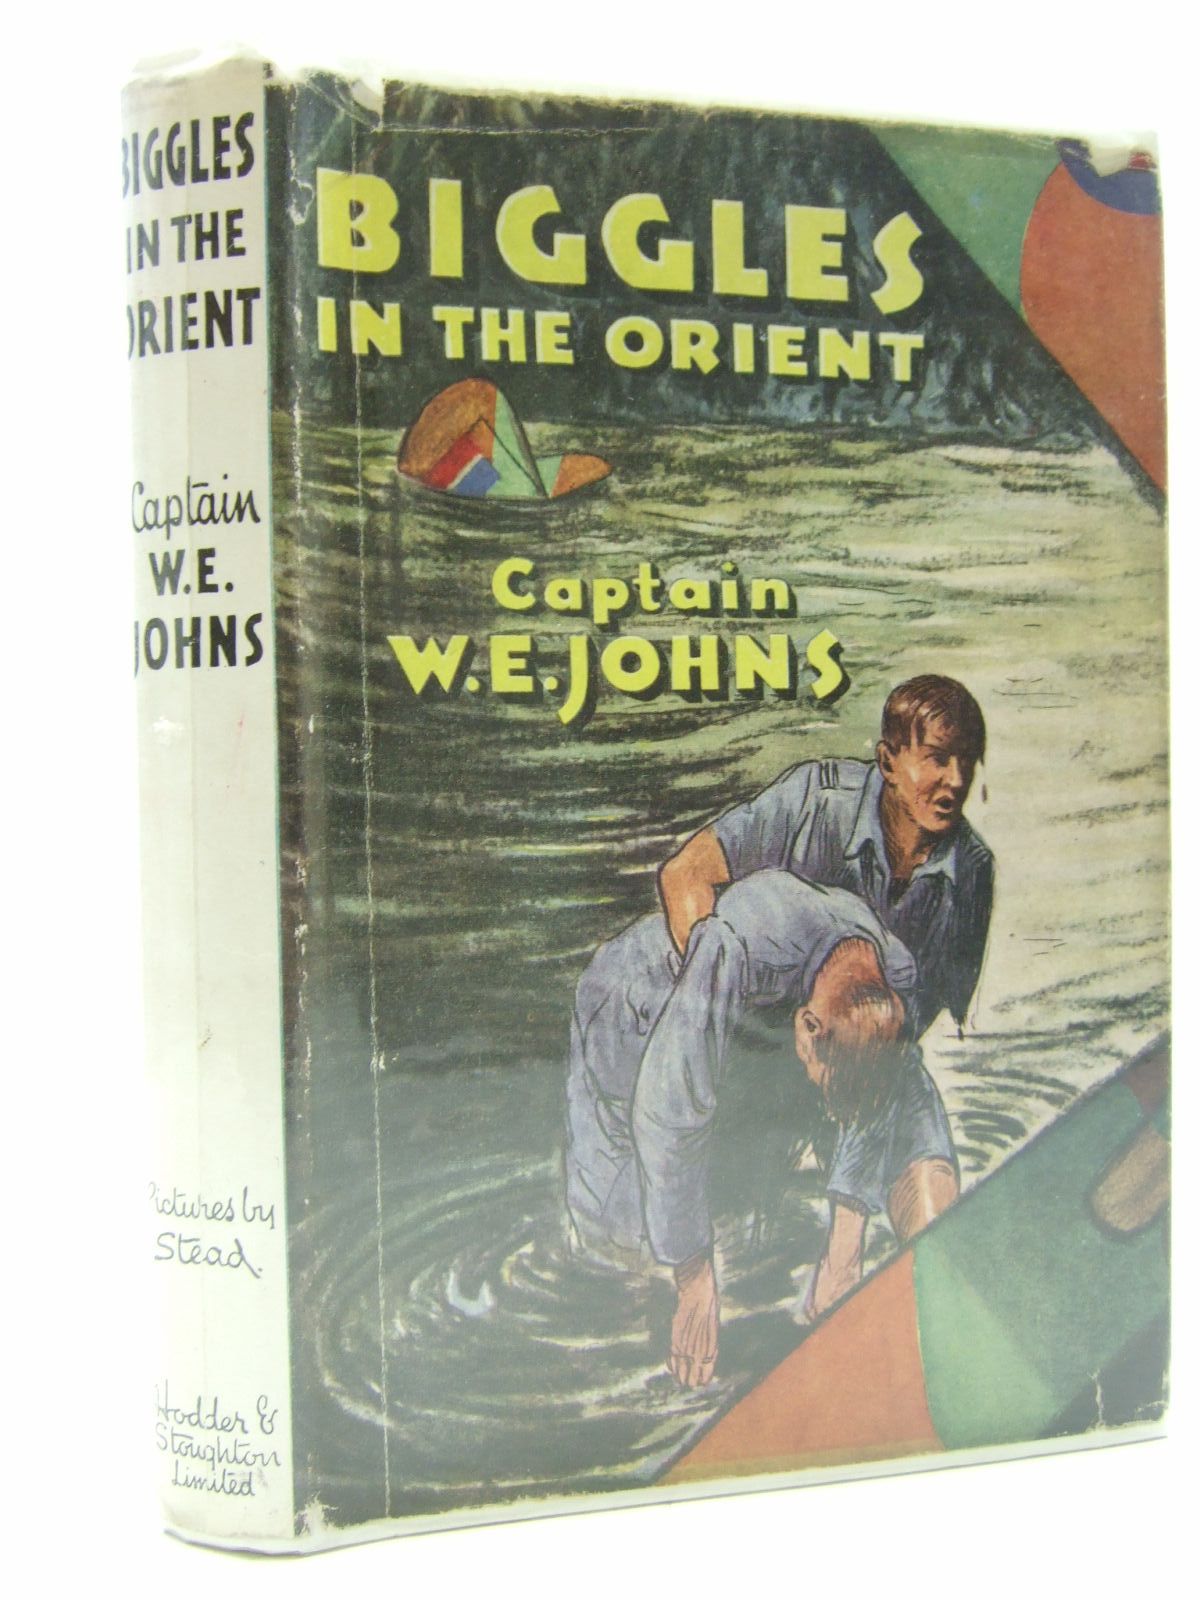 Cover of BIGGLES IN THE ORIENT by W.E. Johns